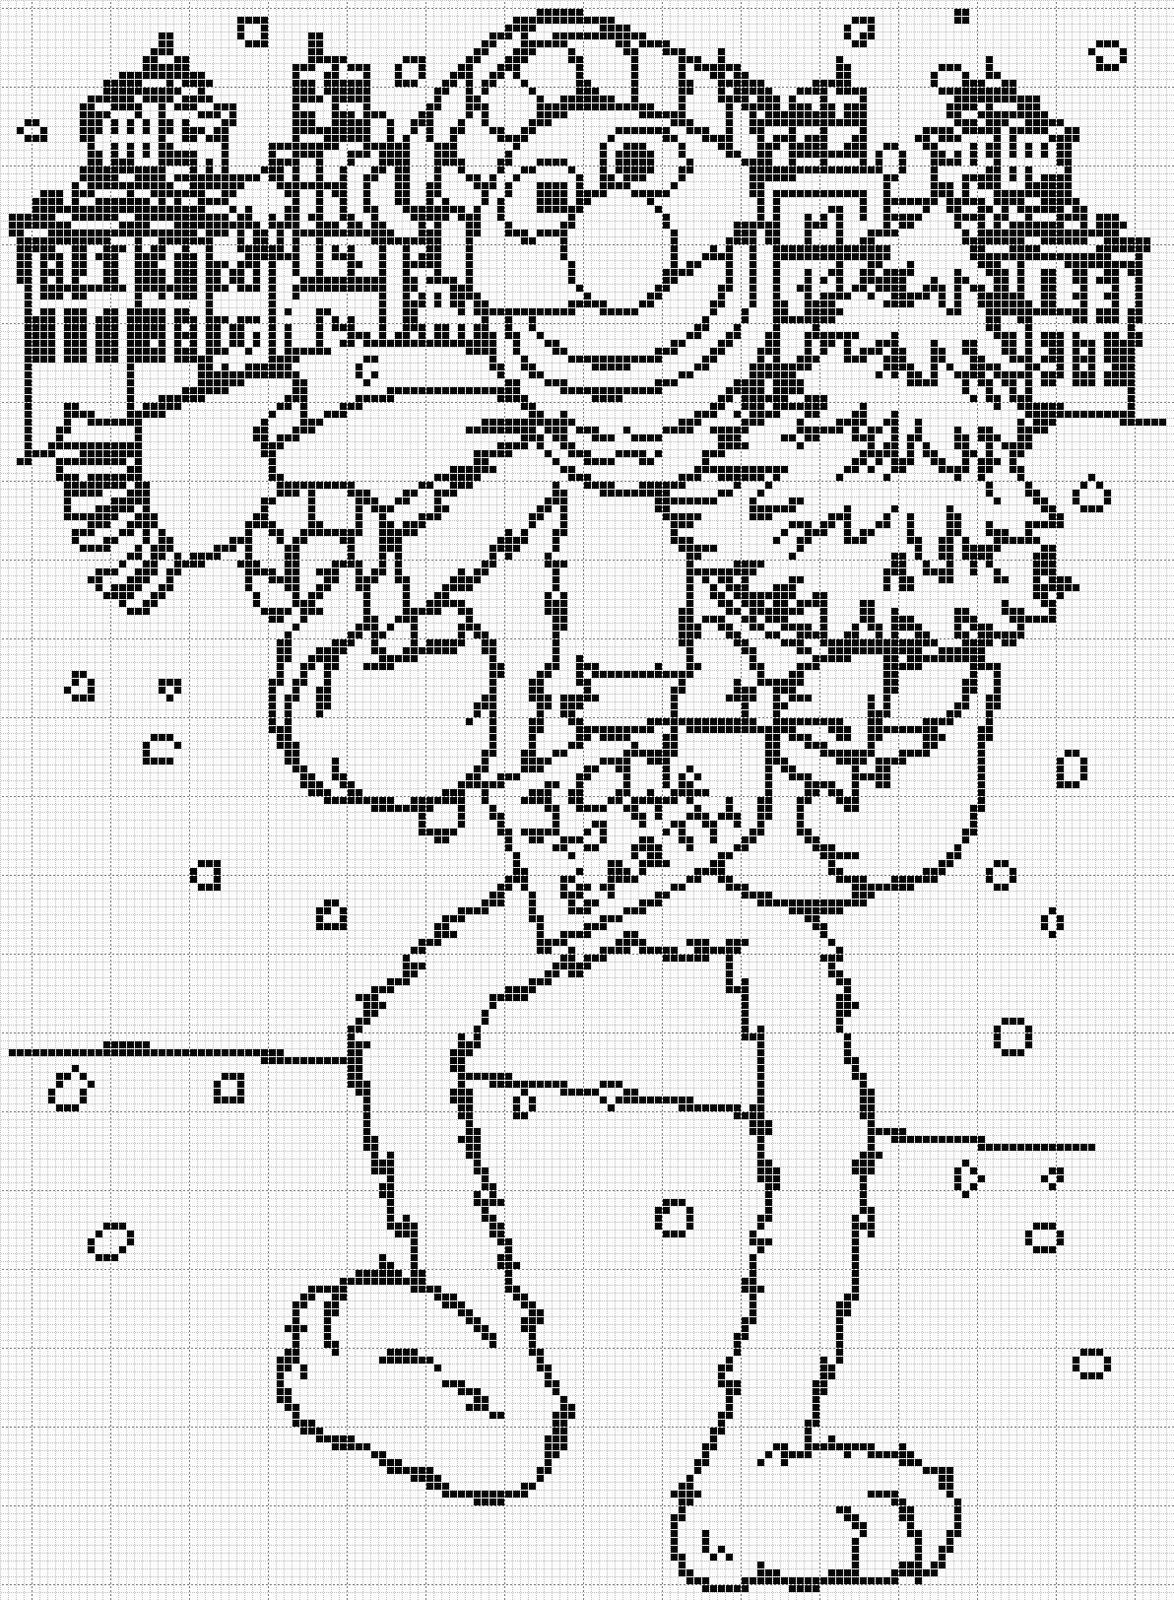 13 Pics of Sesame Street Coloring Pages Christmas - Sesame Street ...